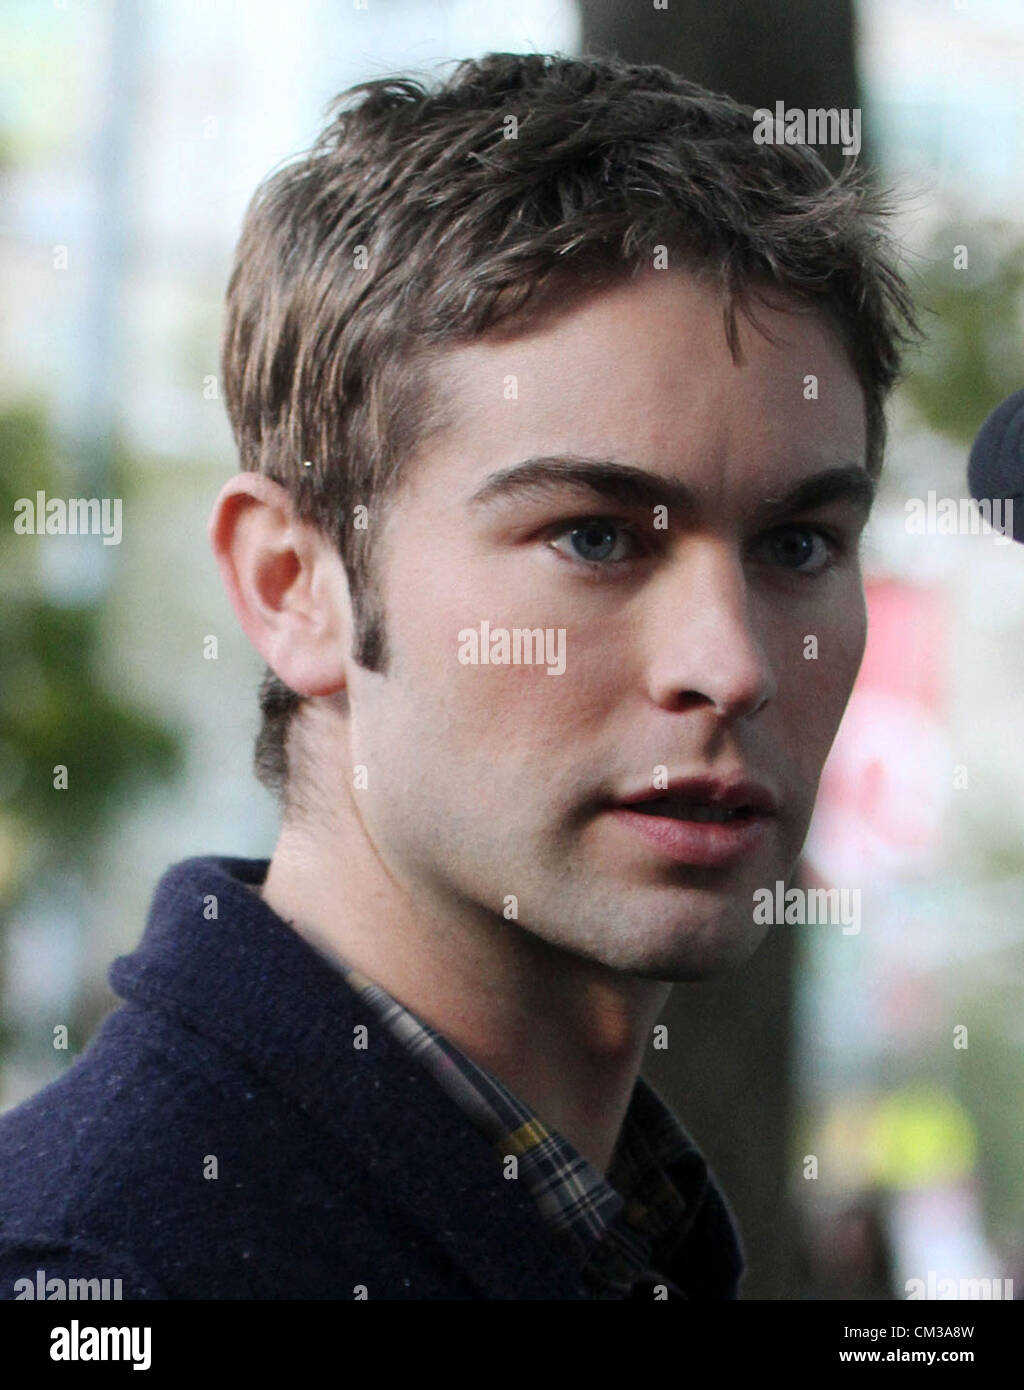 Sept. 24, 2012 - New York, New York, U.S. - Actor CHACE CRAWFORD films a scene from hIS TV show 'Gossip Girl' on the Upper West Side. (Credit Image: © Nancy Kaszerman/ZUMAPRESS.com) Stock Photo